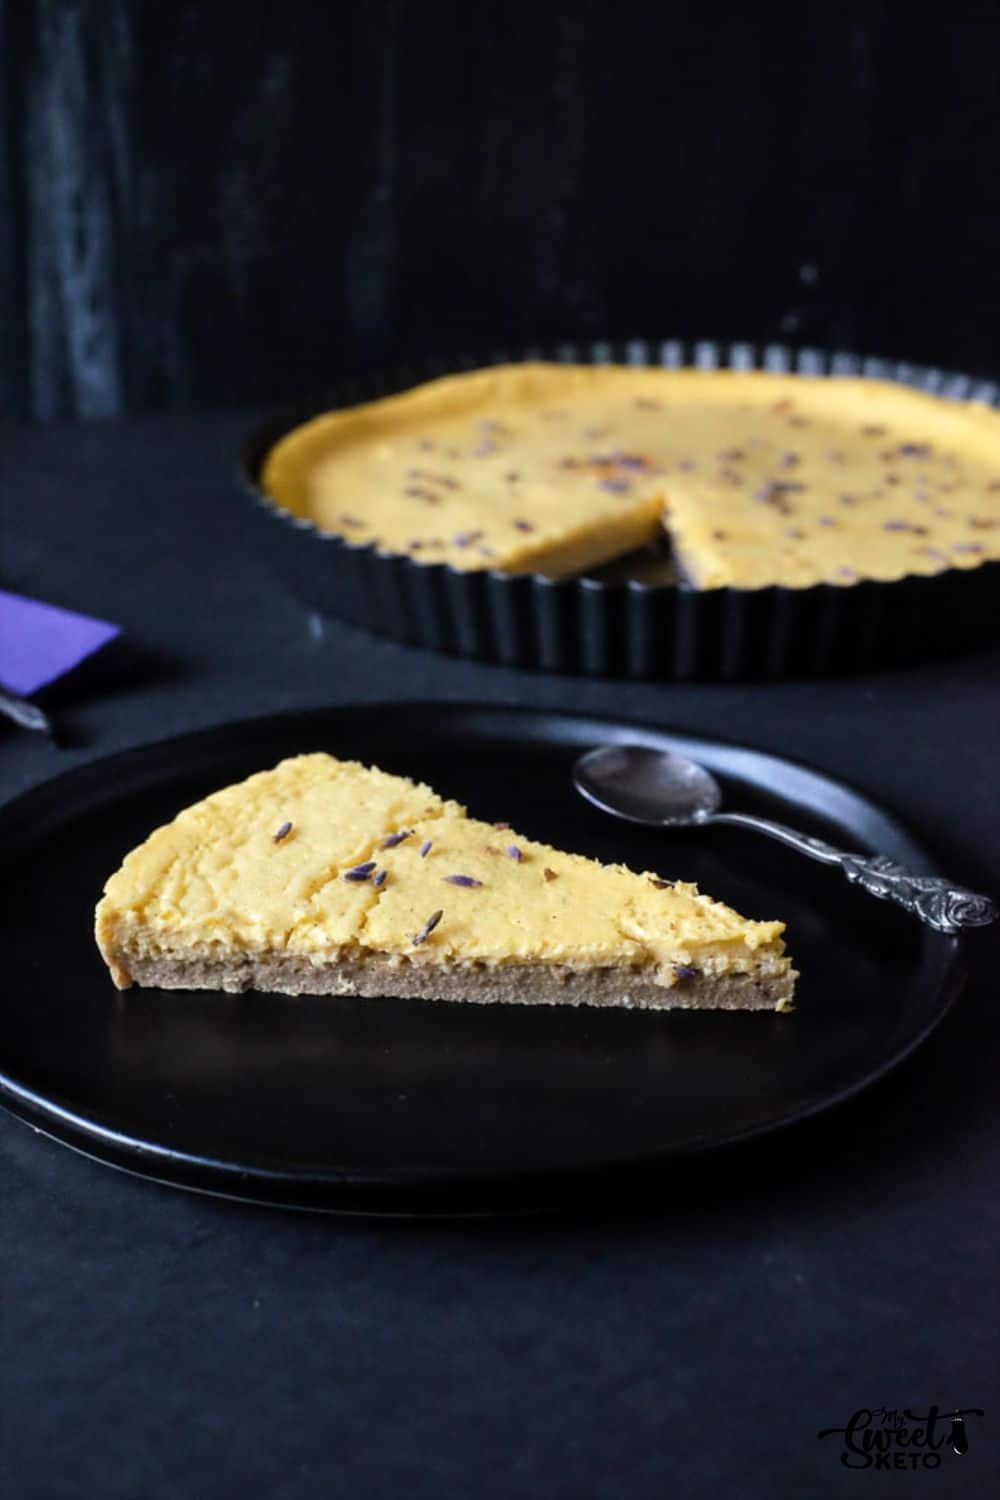 When doing Egg Fast diet, eating eggs for 3 to 5 days could seem like forever if you weren't able to enjoy an occasional treat like Egg Fast Custard Tart. #lowcarb #eggfast